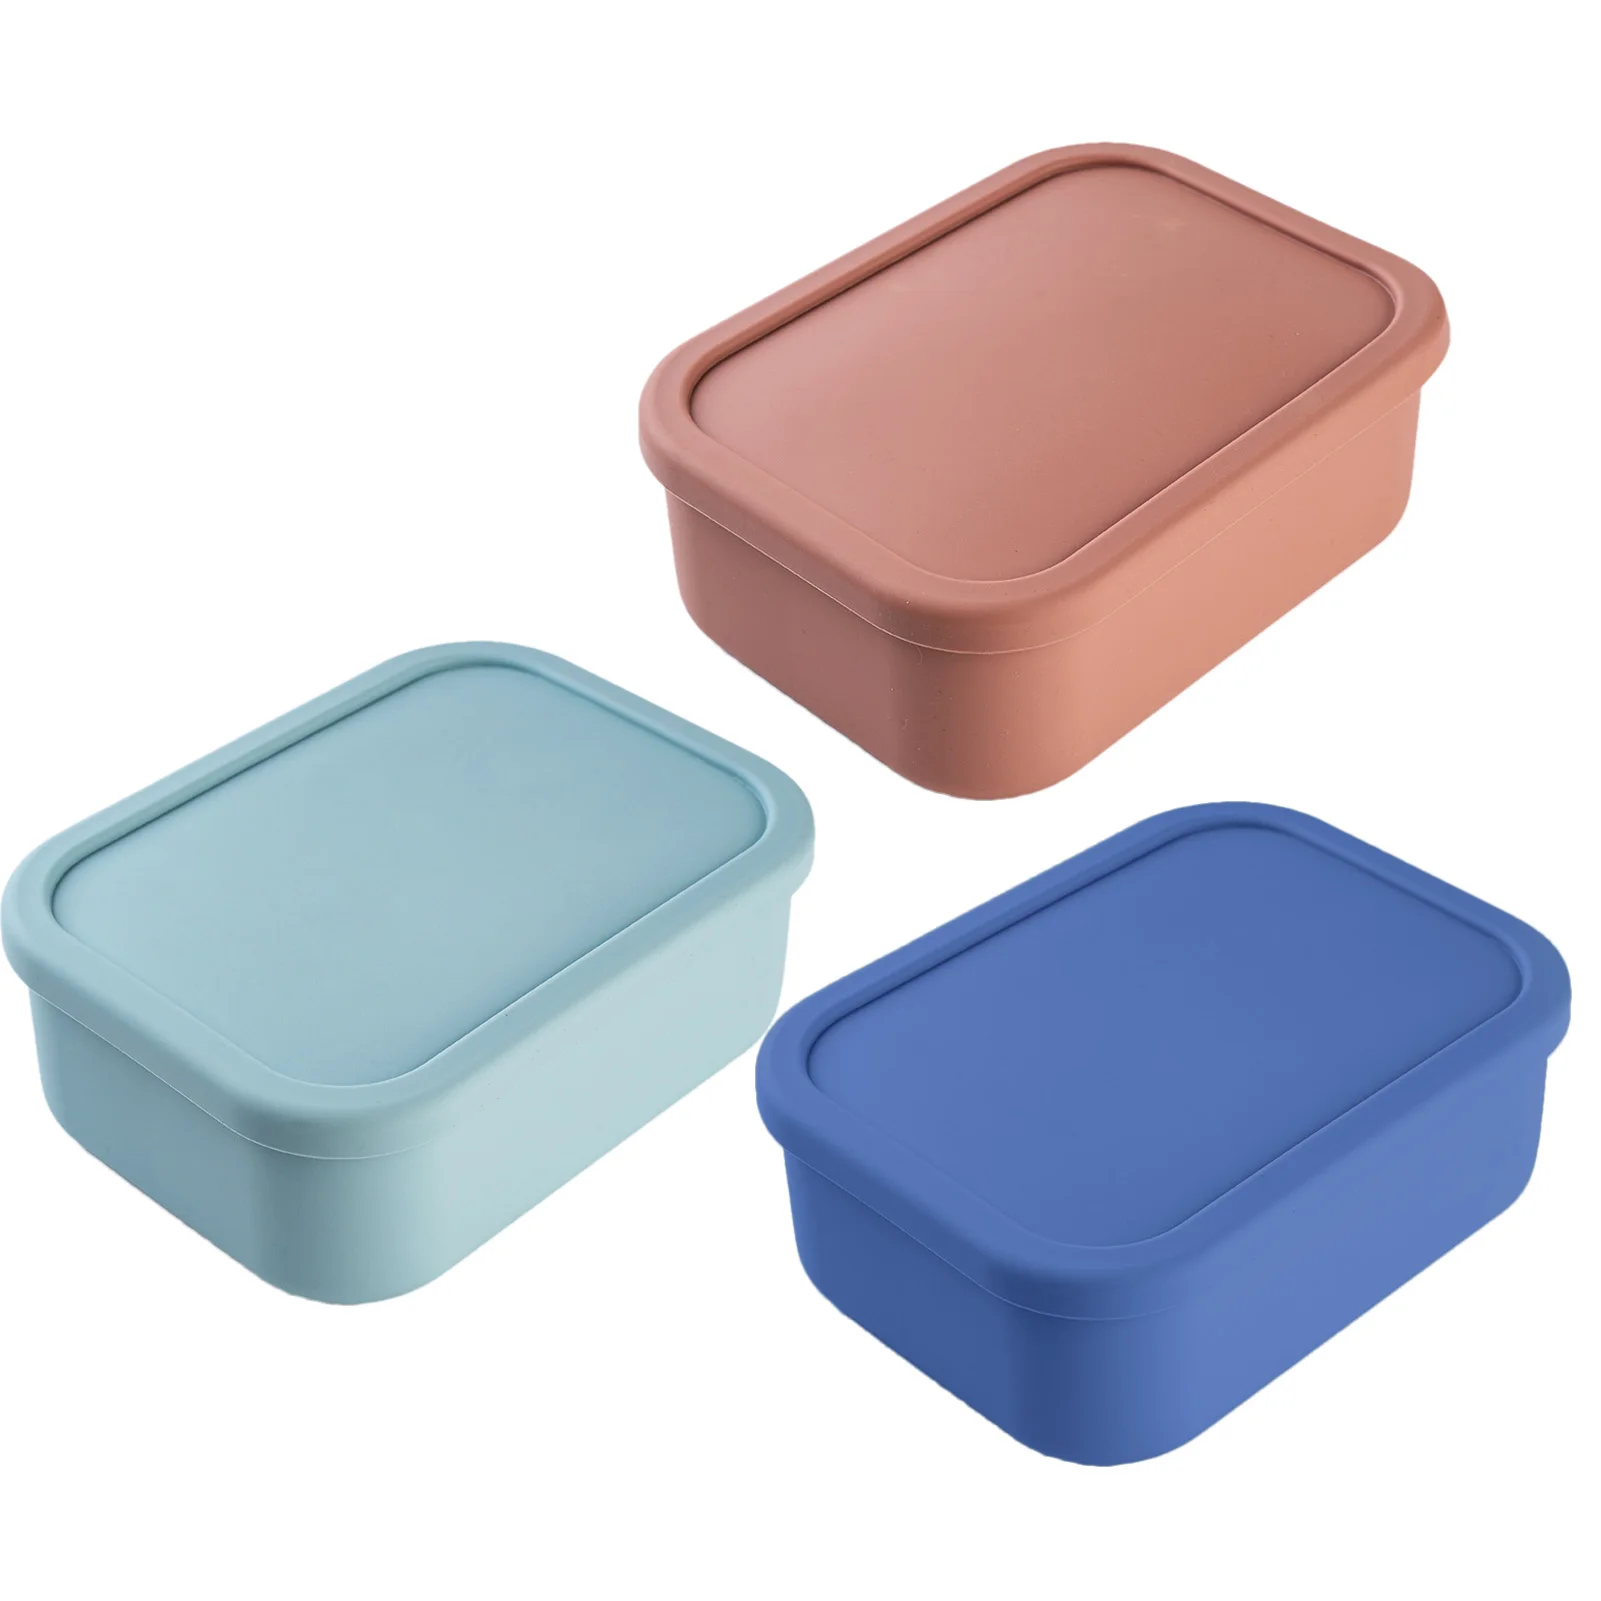 Silicone Bento Box Durable Lunch Box Containers With 3 Compartments Stackable Food Storage Container With Lid For Lunch Snacks